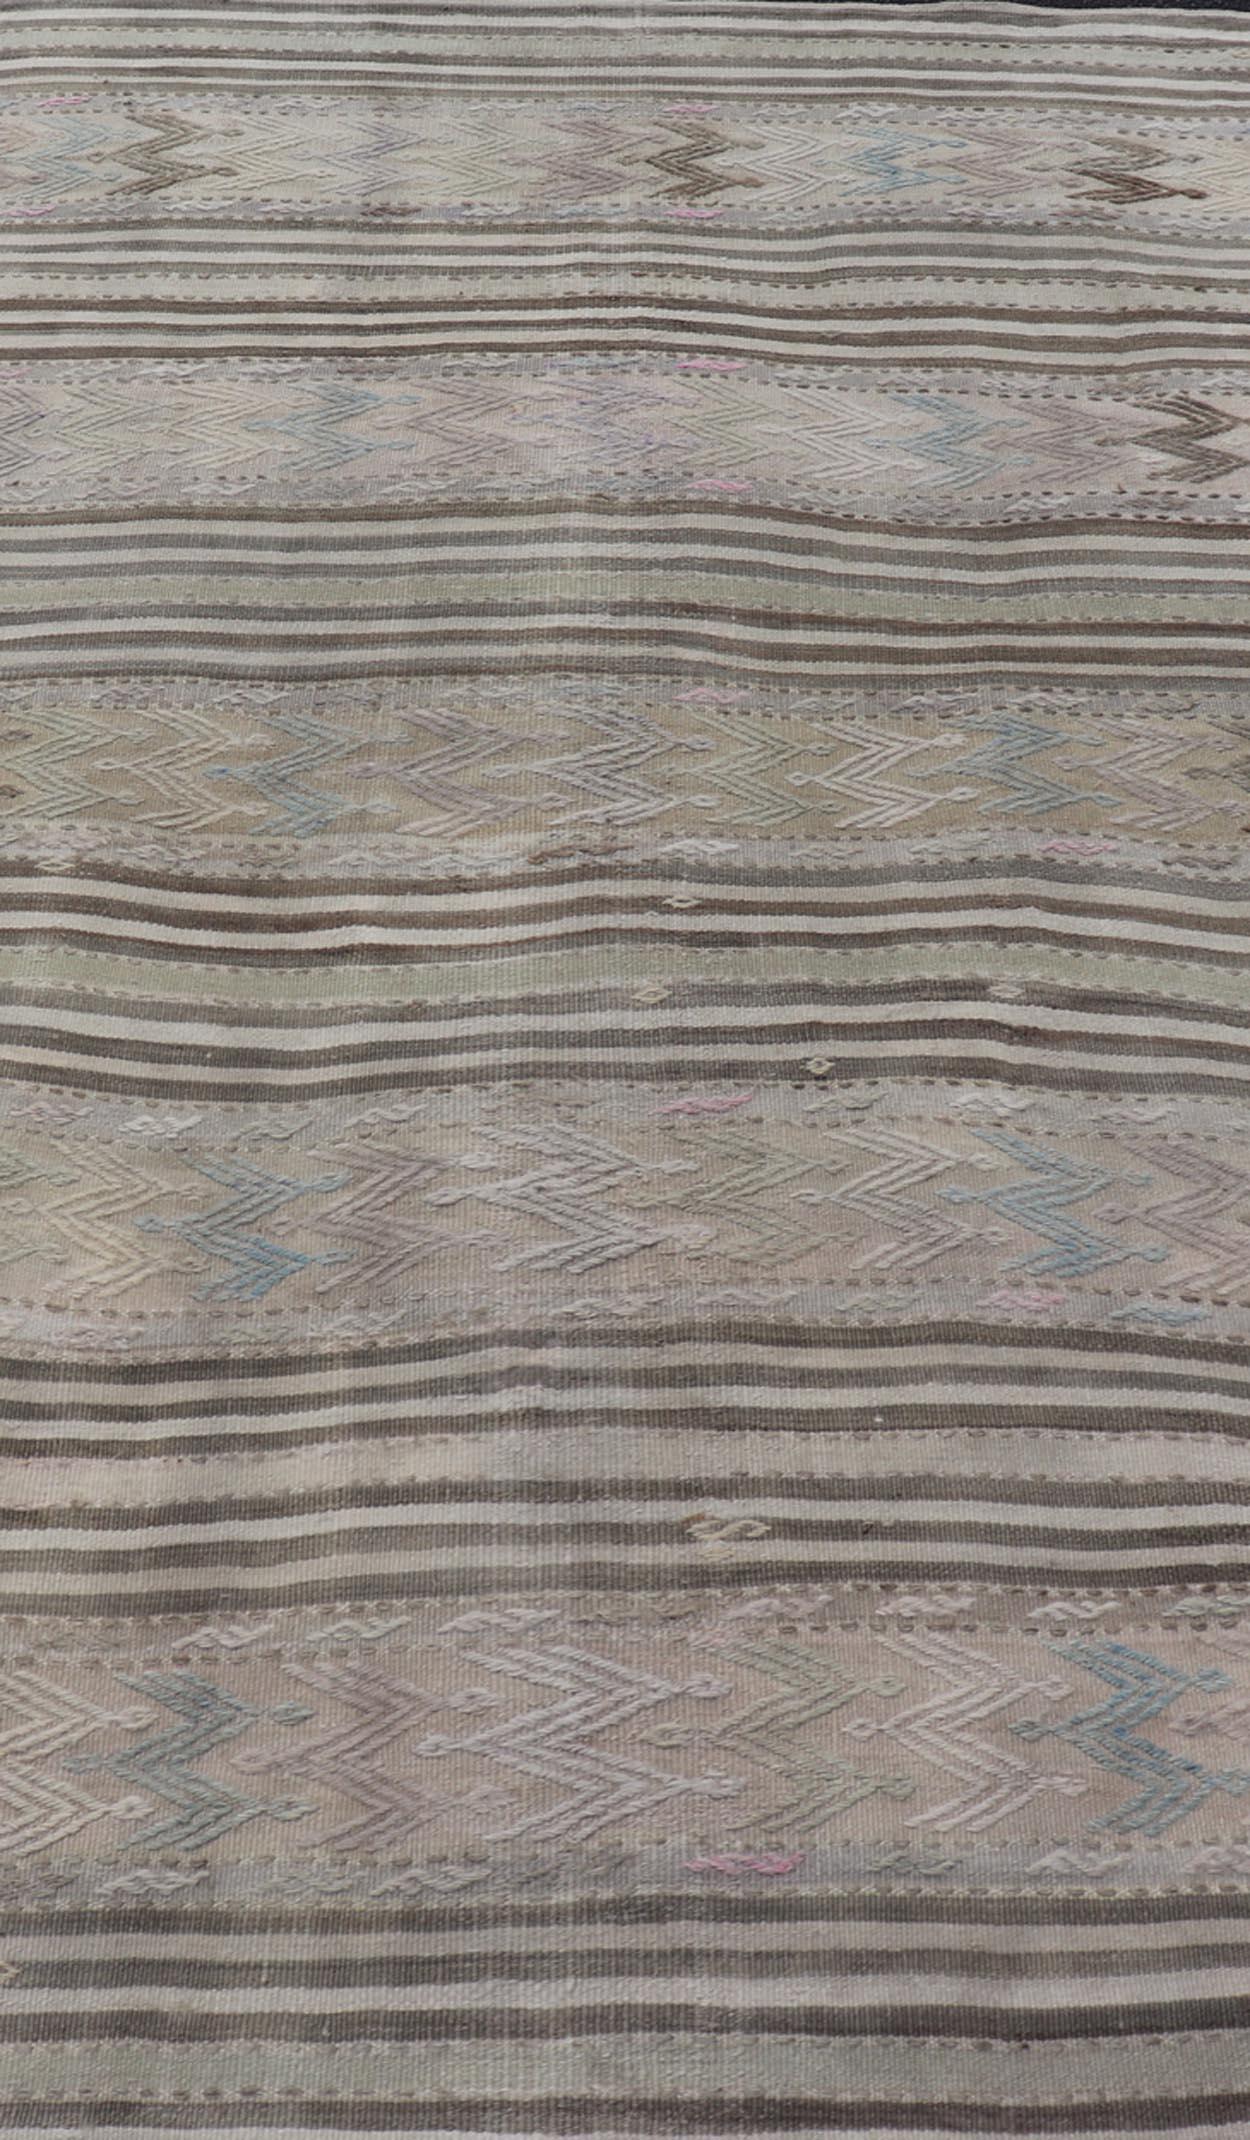 Hand-Woven Vintage Turkish Flat-Weave Embroideries Kilim in Taupe, Lt. Blue, Brown, Tan For Sale